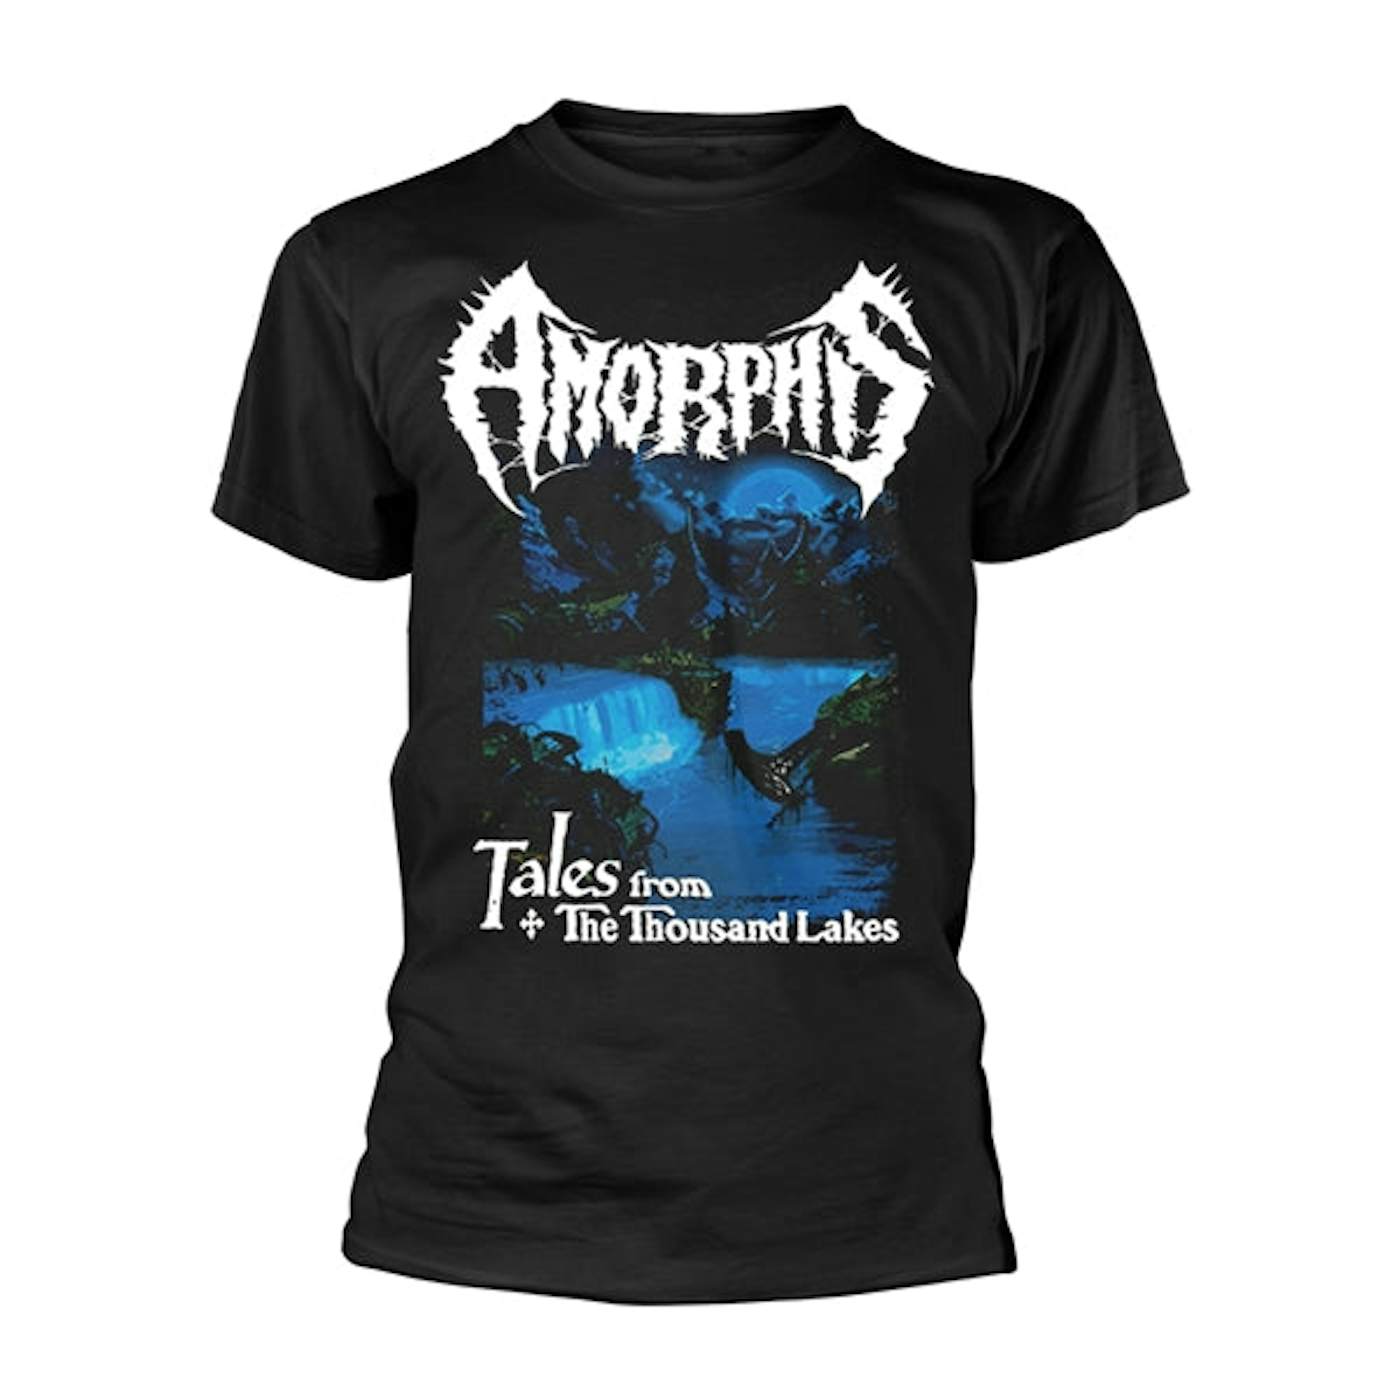 Amorphis T Shirt - Tales From the Thousand Lakes